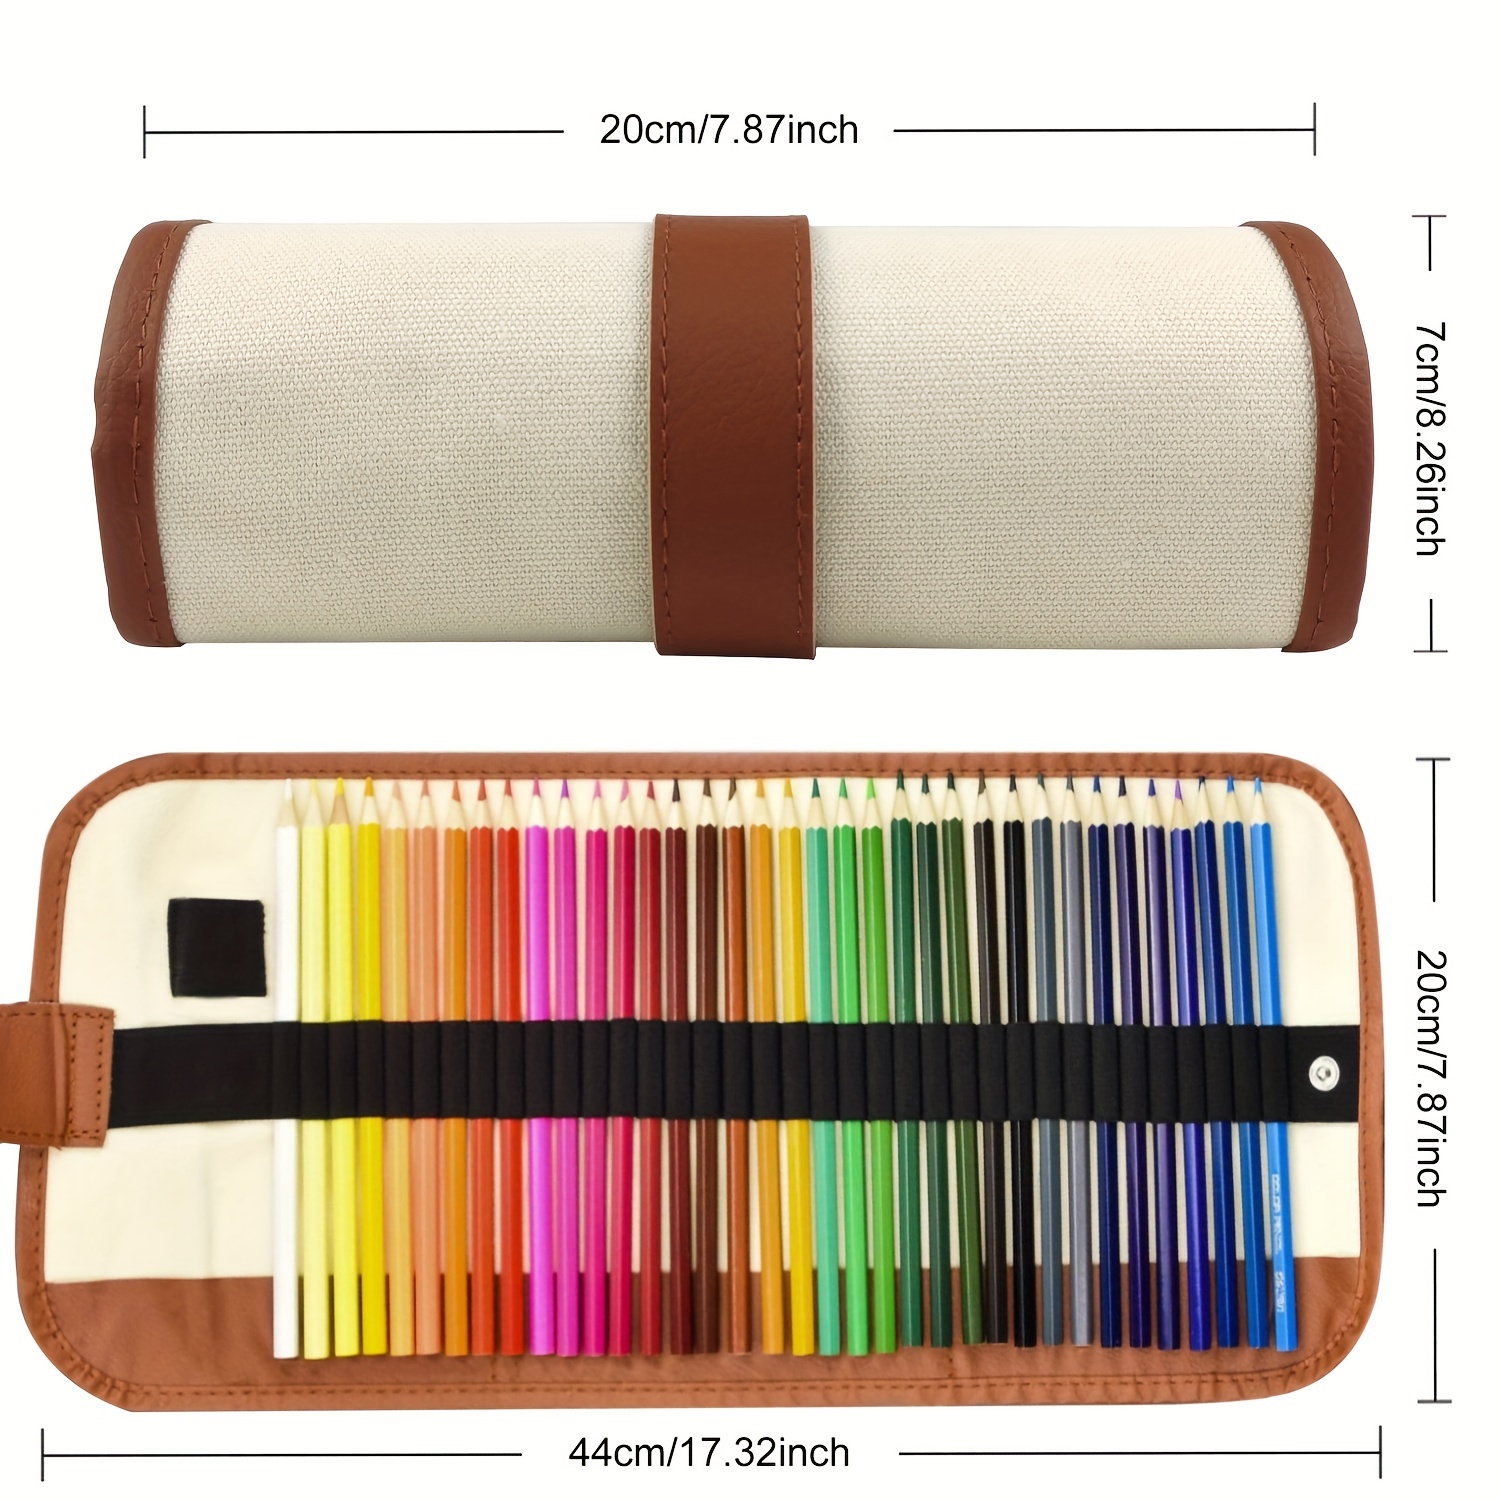 Sharpened colored pencils in a pencil case, top view